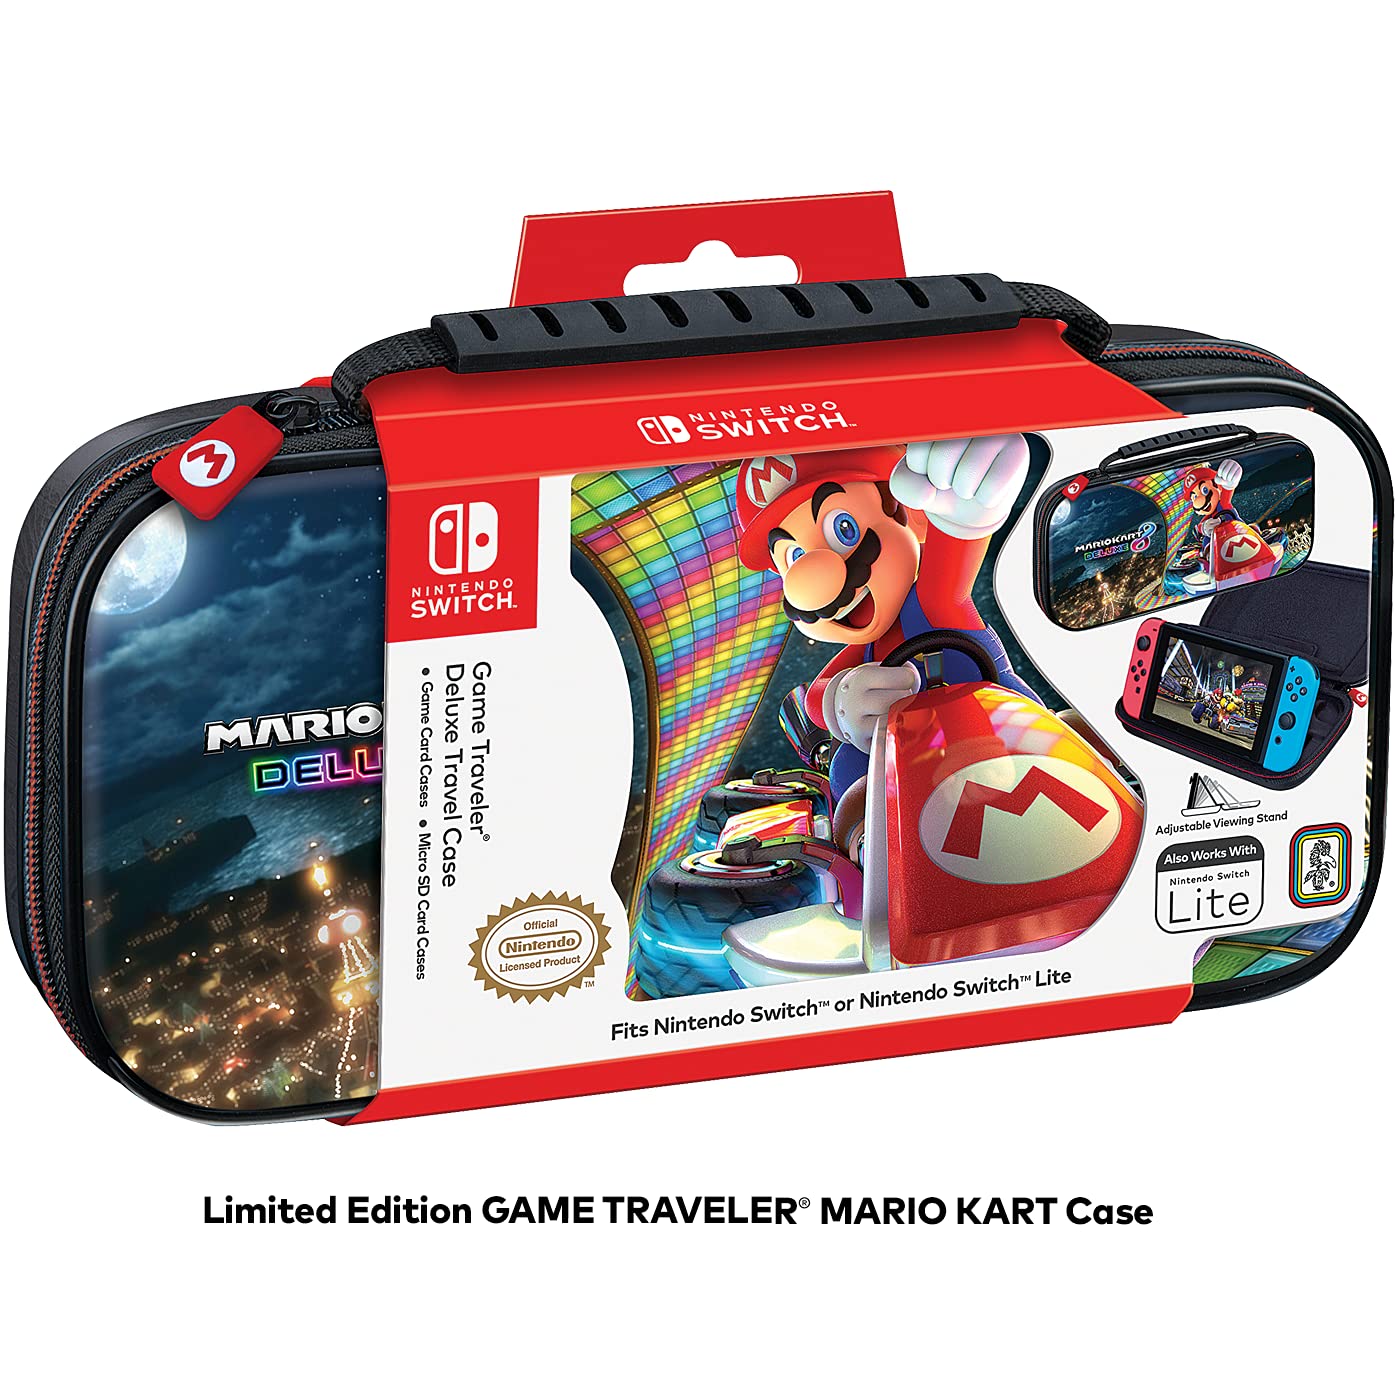 Nintendo Switch Mario Kart 8 Neon Multiplayer Bundle: Red Blue JoyCon Console, Mario Kart 8 Deluxe & Online Membership, Travel Case Mytrix Tempered Glass Screen Protector, and Joystick caps